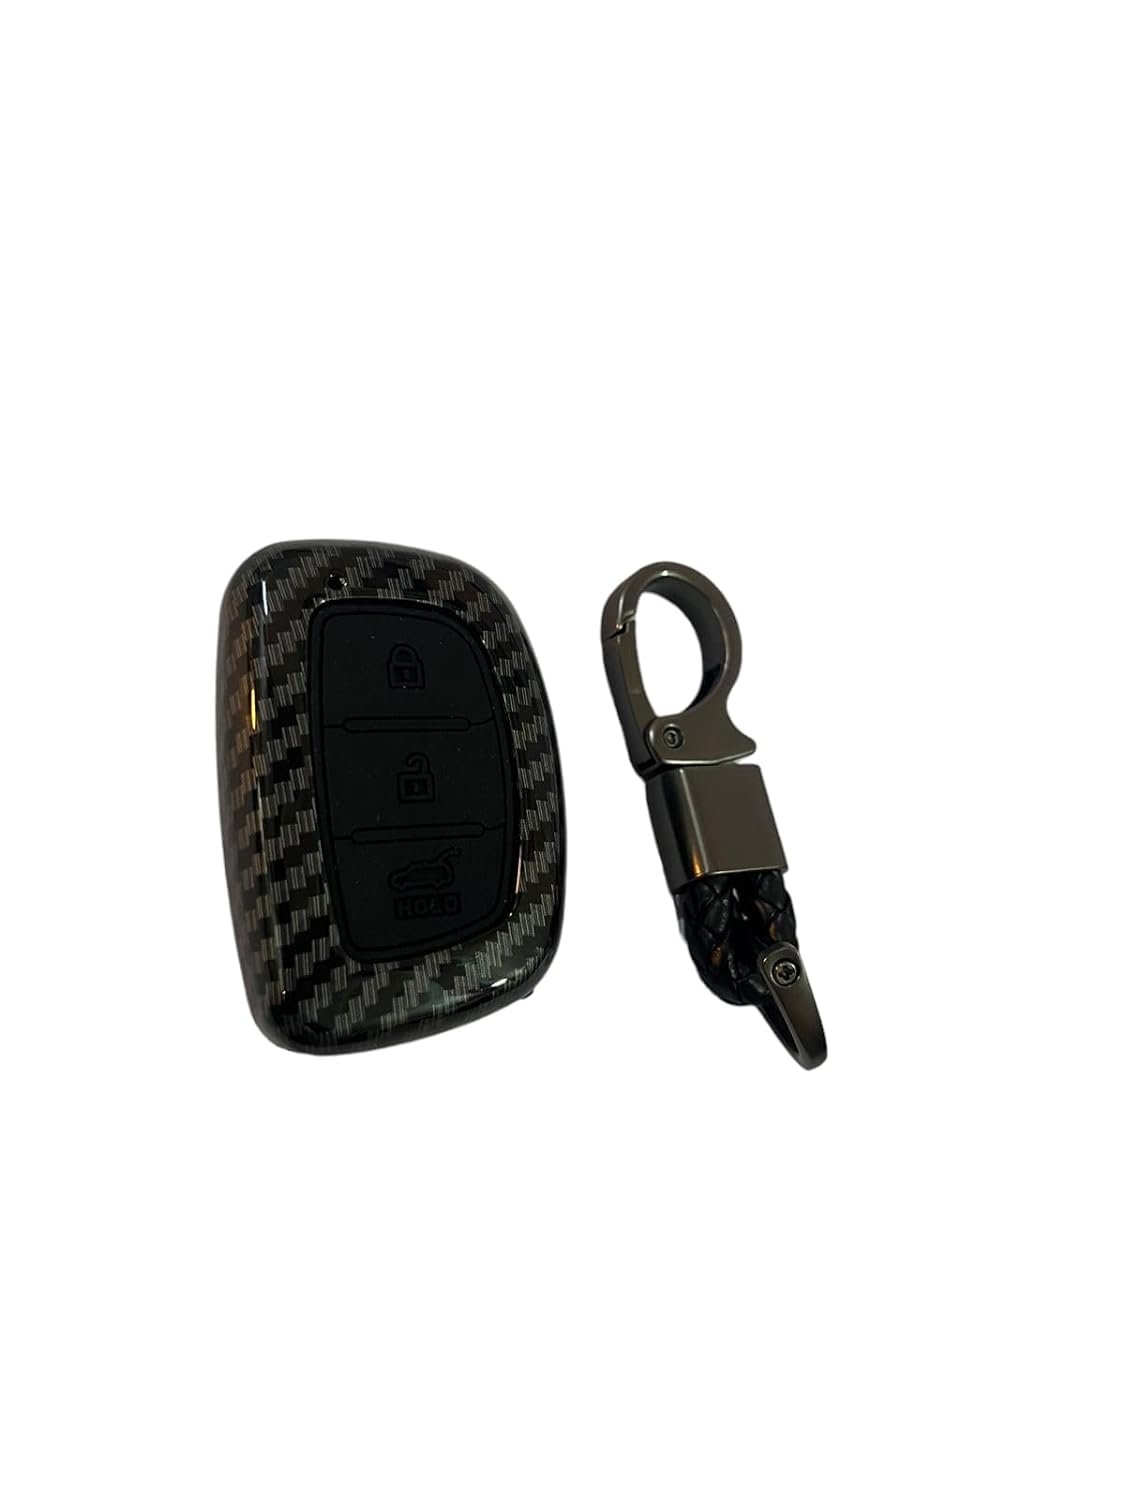 Carbon Fiber ABS Car Key Cover Compatible with Elite i20, Active i20, Aura (Push Button Start Models only) (Key Chain Included) Image 